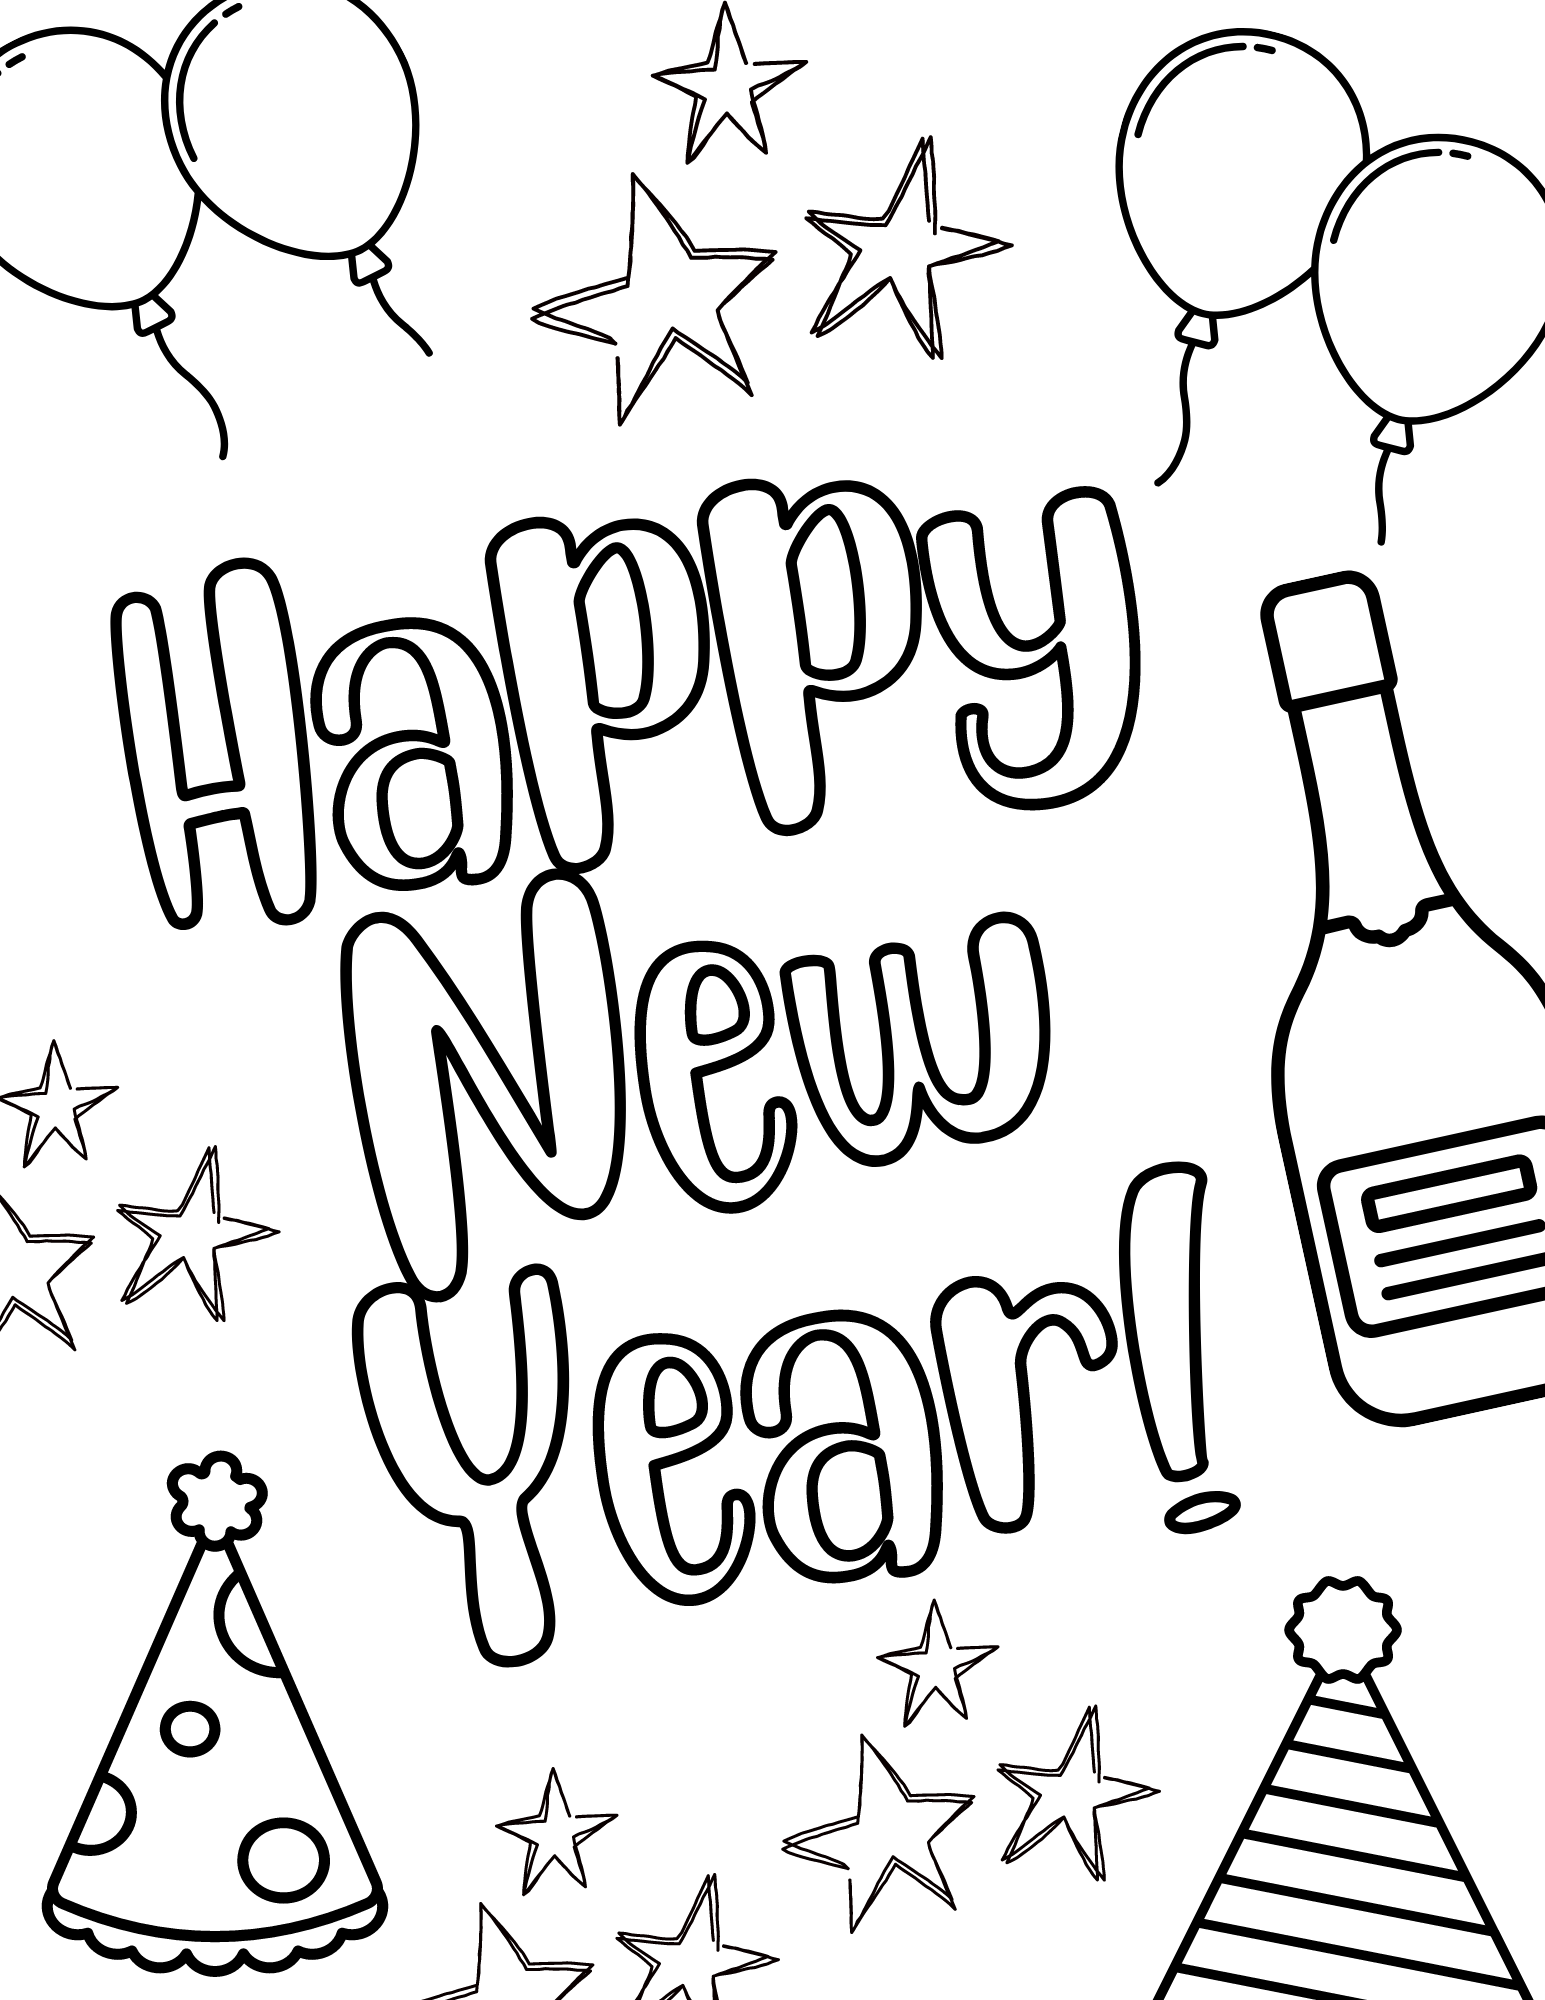 Free happy new year coloring pages for kids